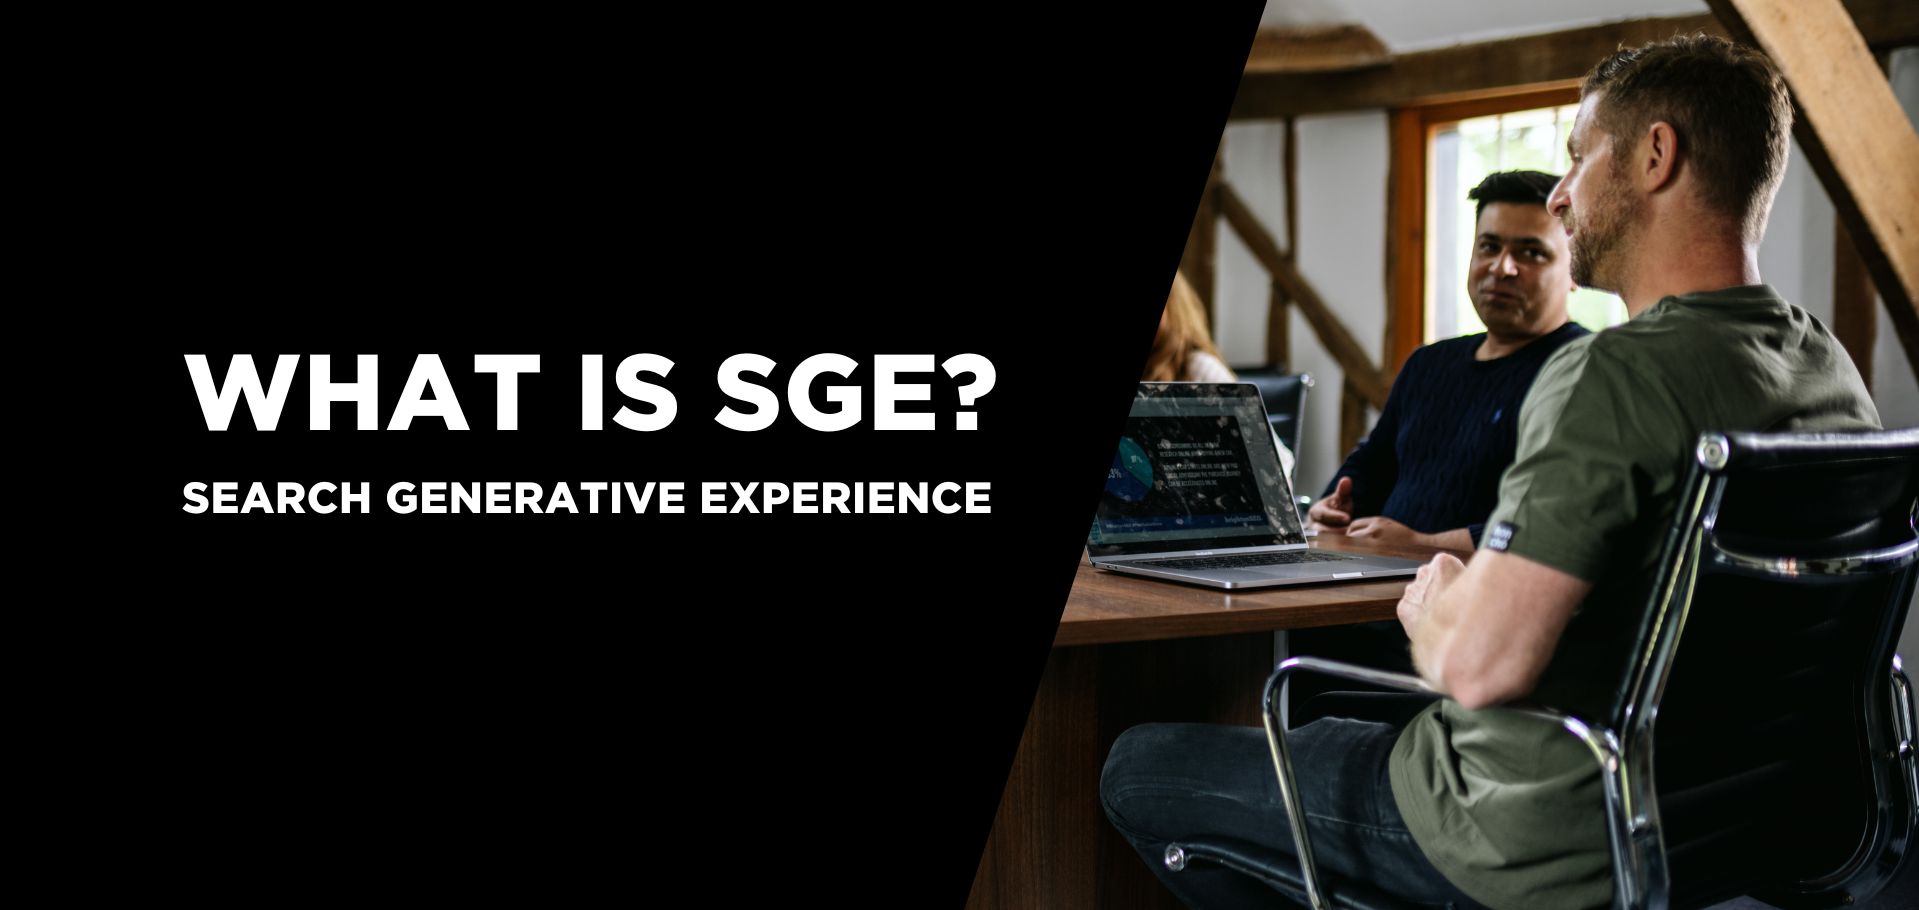 What is SGE?